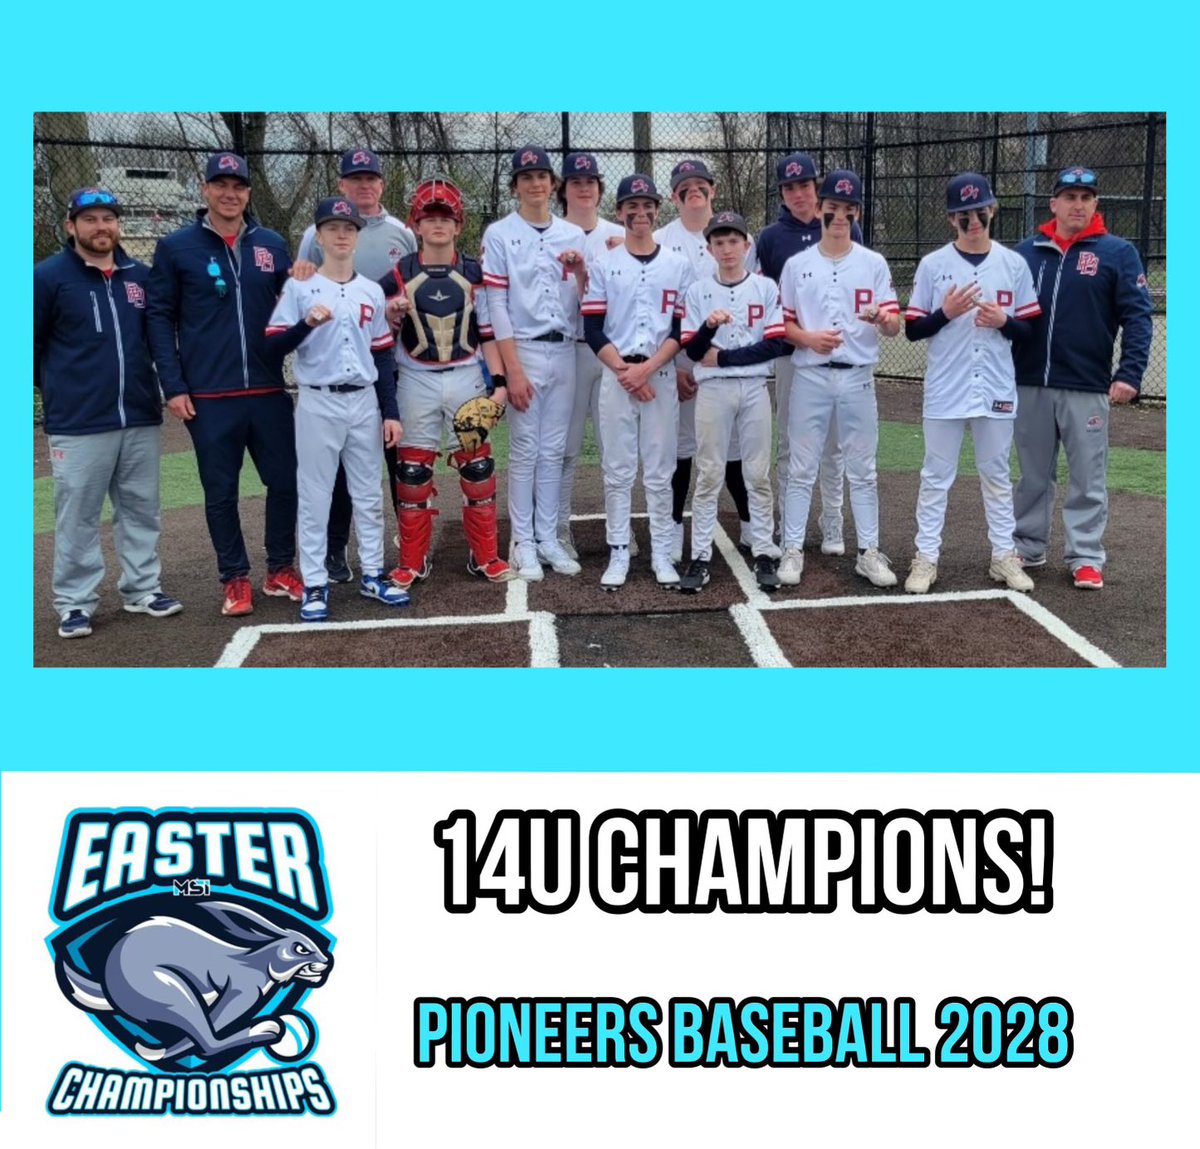 12U South Jersey Young Guns Carolina and 14U Pioneers Baseball survive Saturday to win the Easter Championship